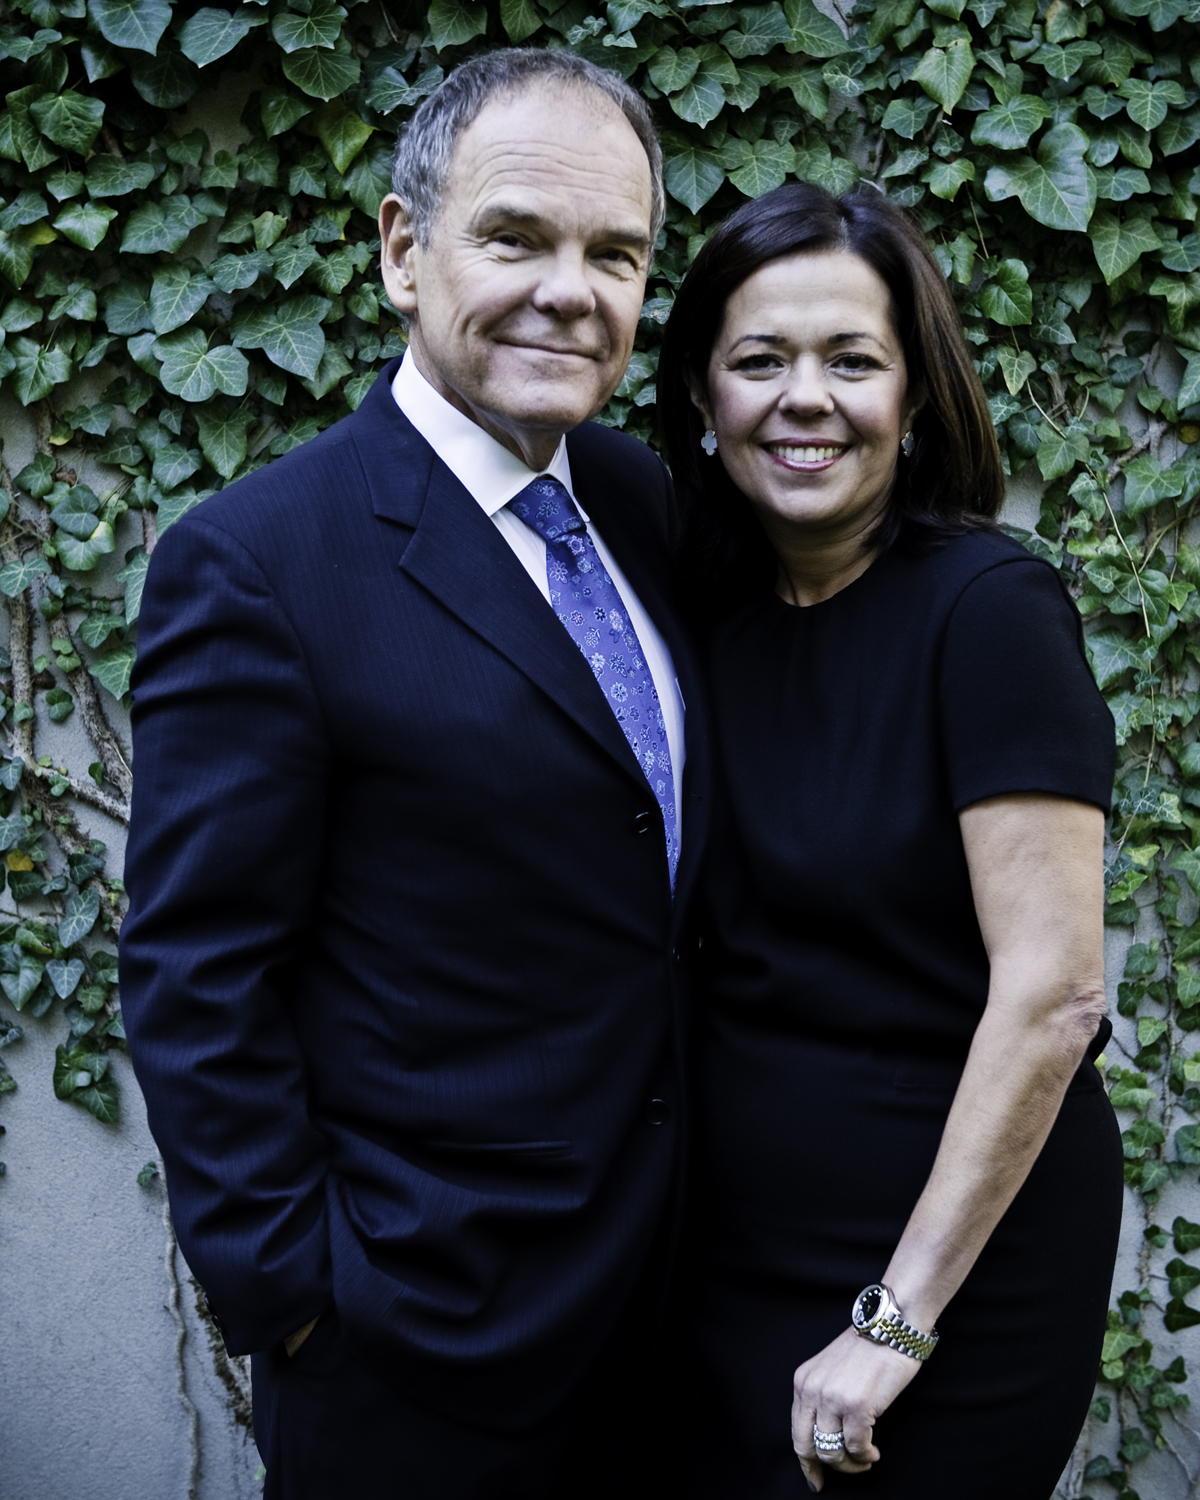 Dr. Don Tapscott in a black suit and Dr. Ana P. Lopes in a black dress